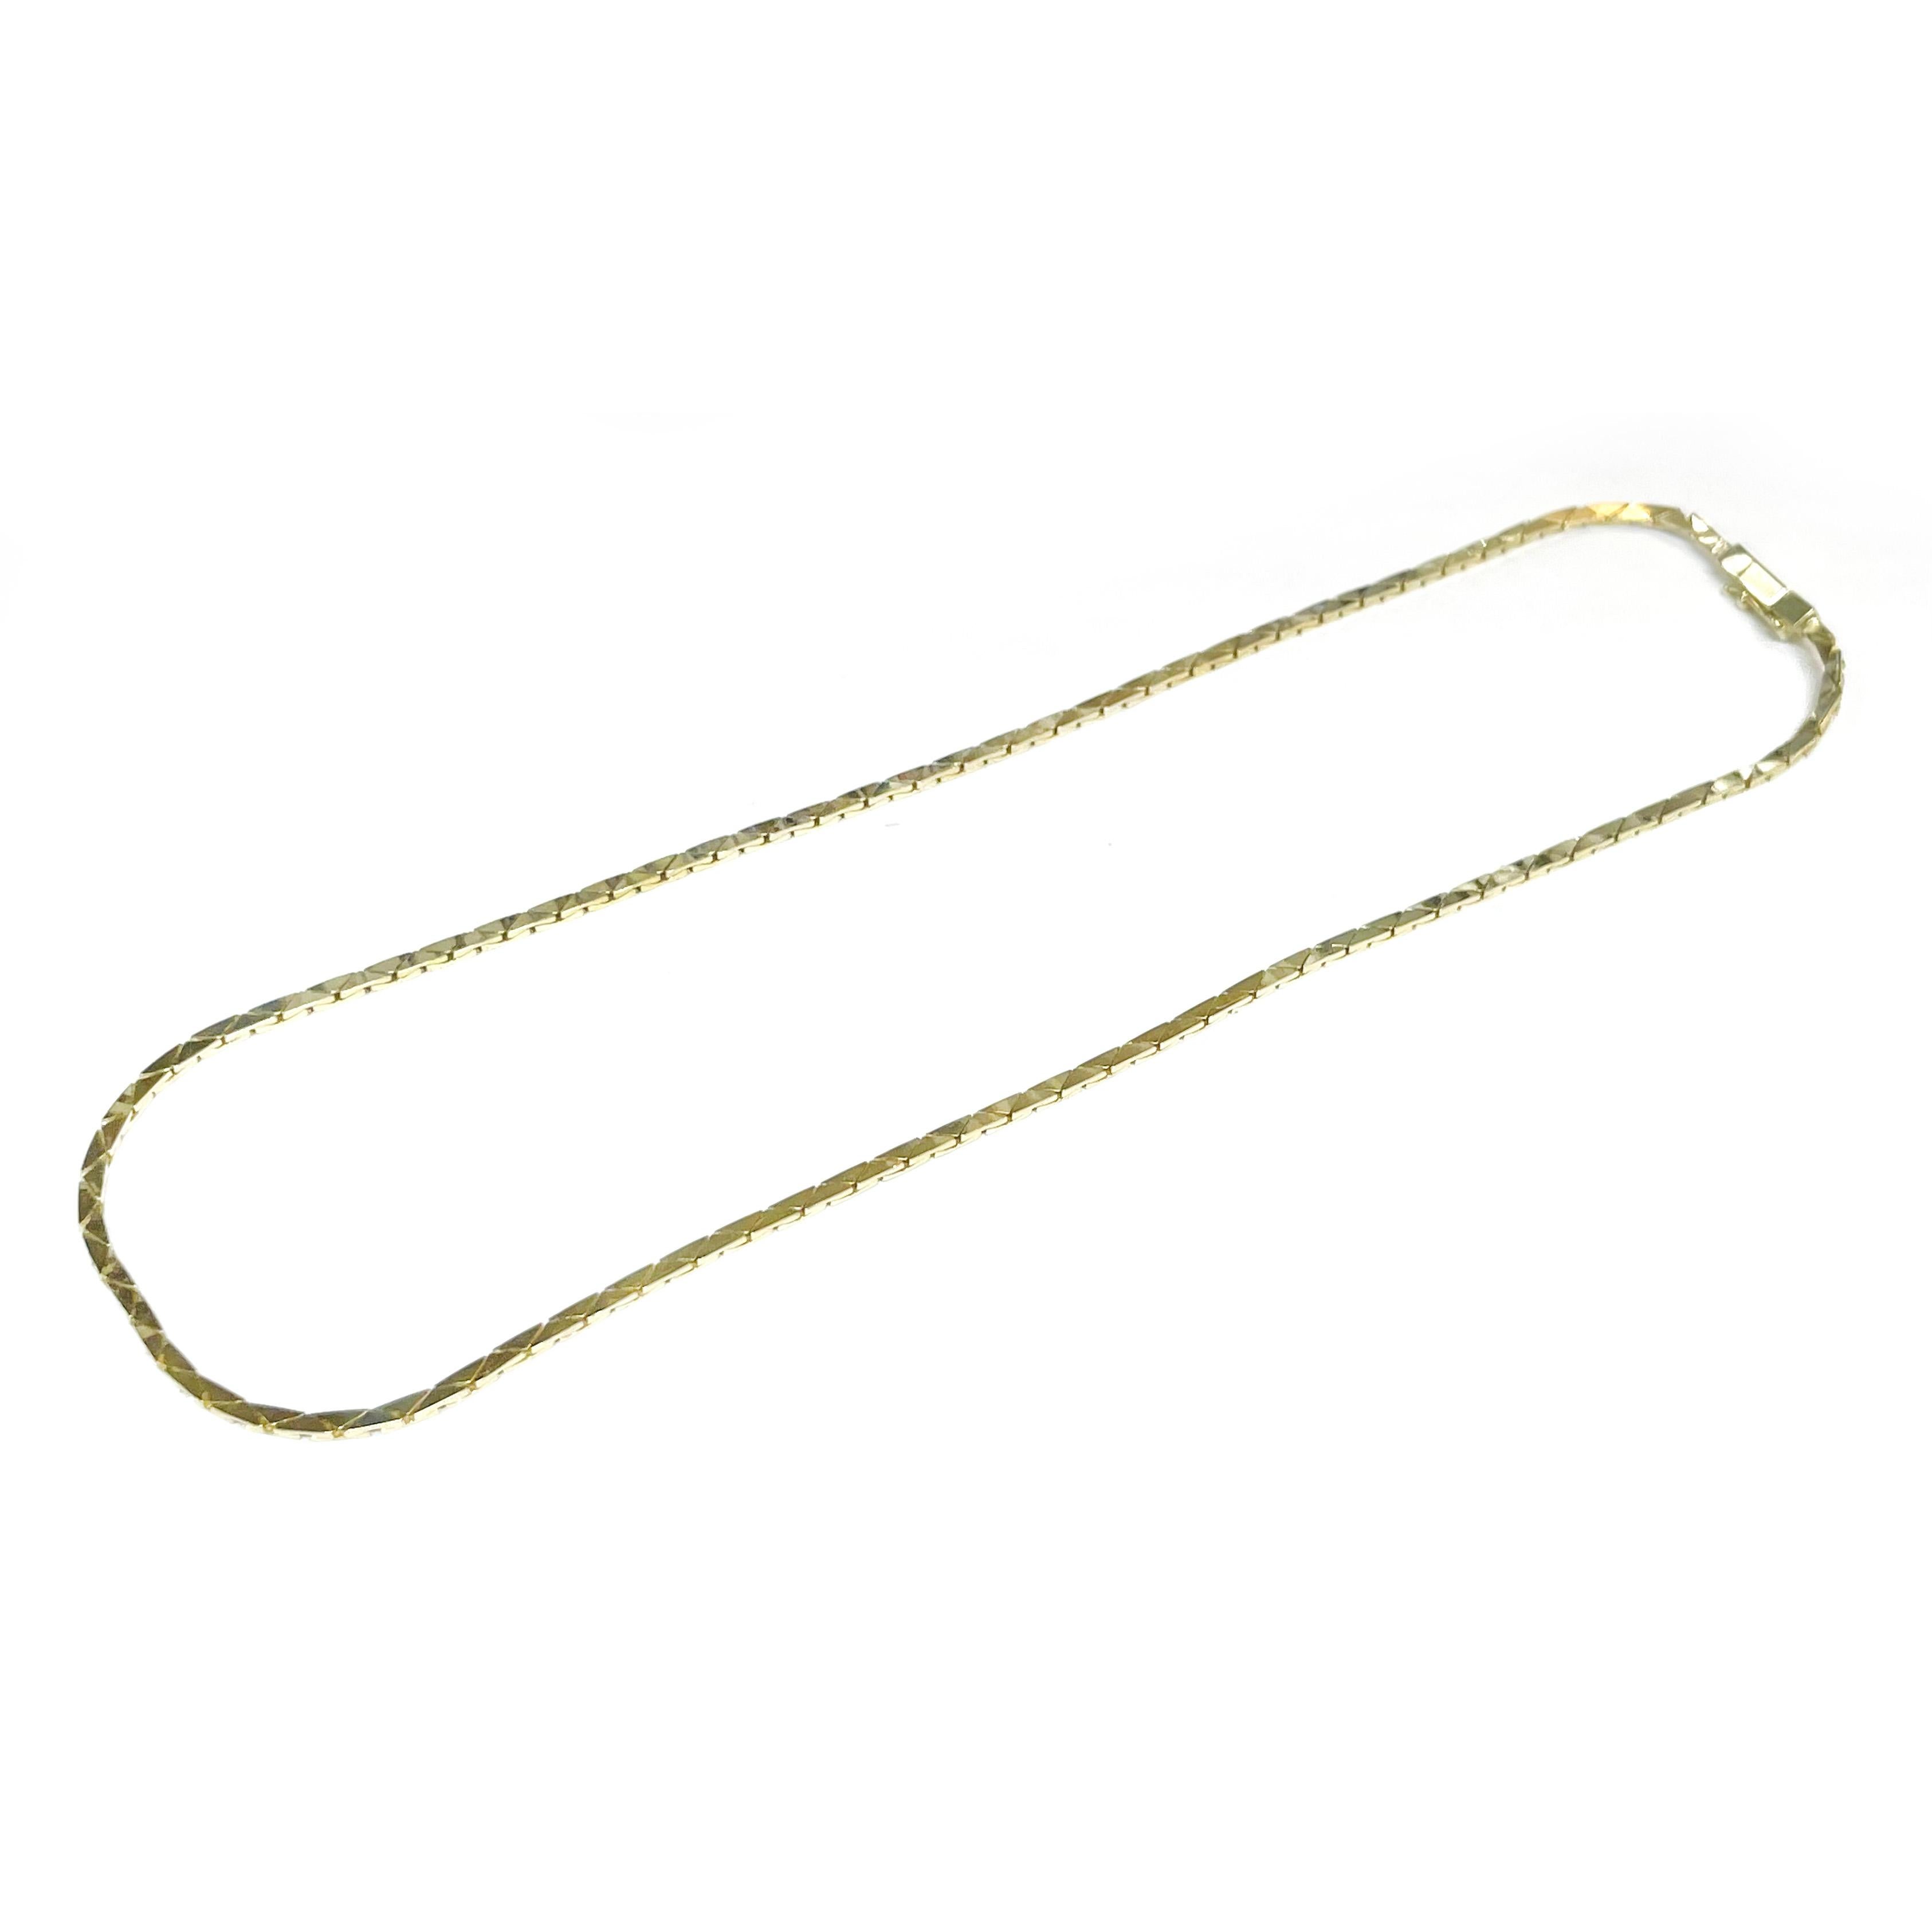 14 Karat Yellow Gold Cobra Chain Necklace. The classic chain is 2mm wide, 1.5mm thick and 16